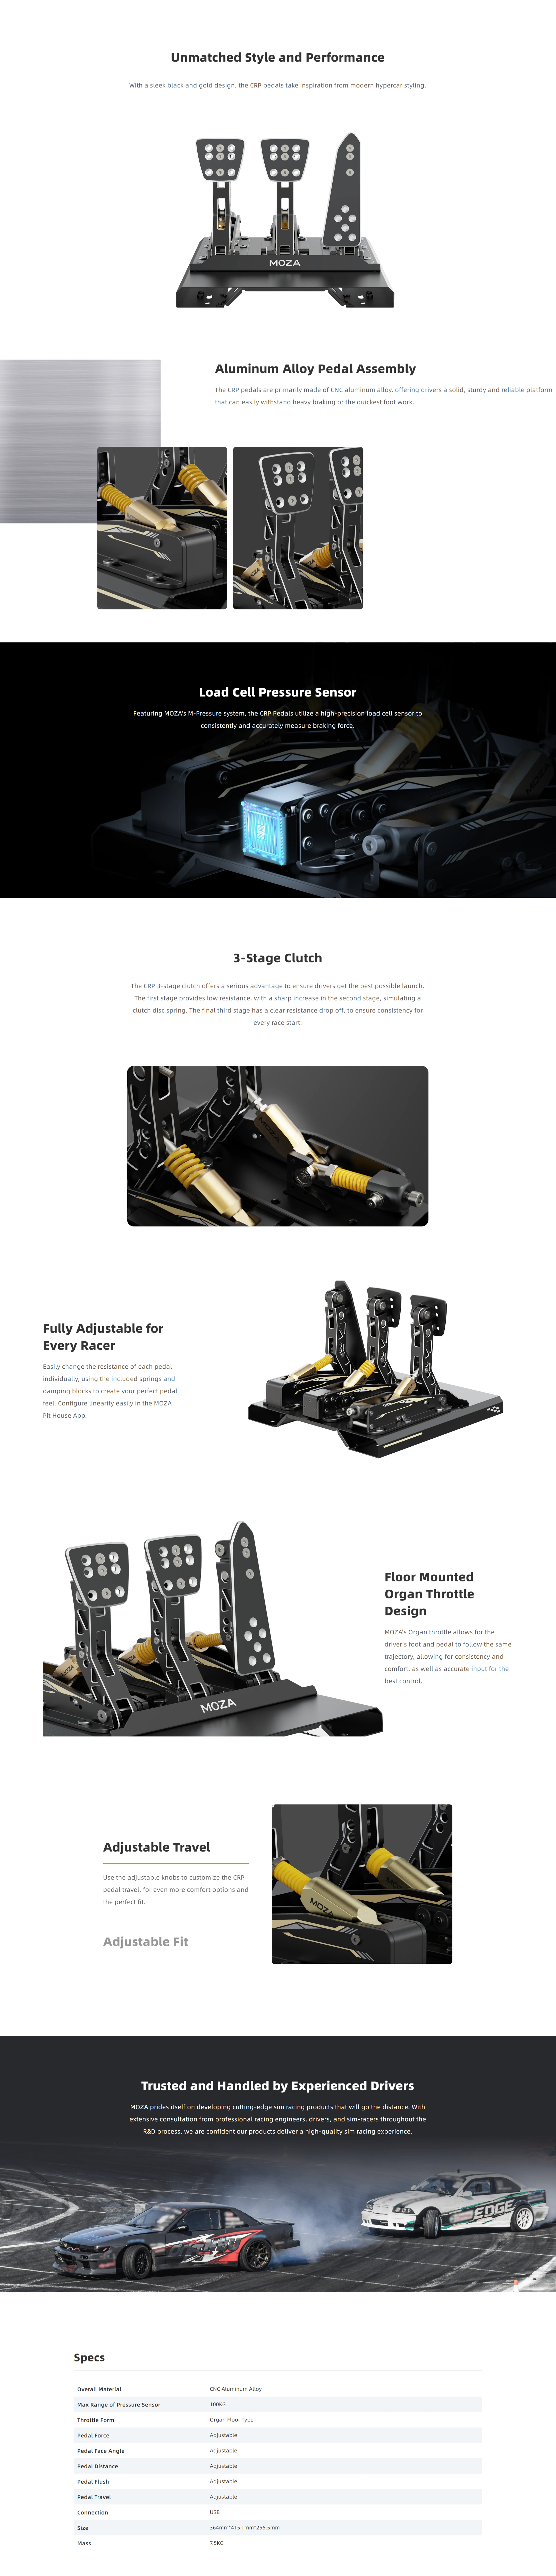 A large marketing image providing additional information about the product MOZA CRP Load Cell Pedal Pedals - Additional alt info not provided